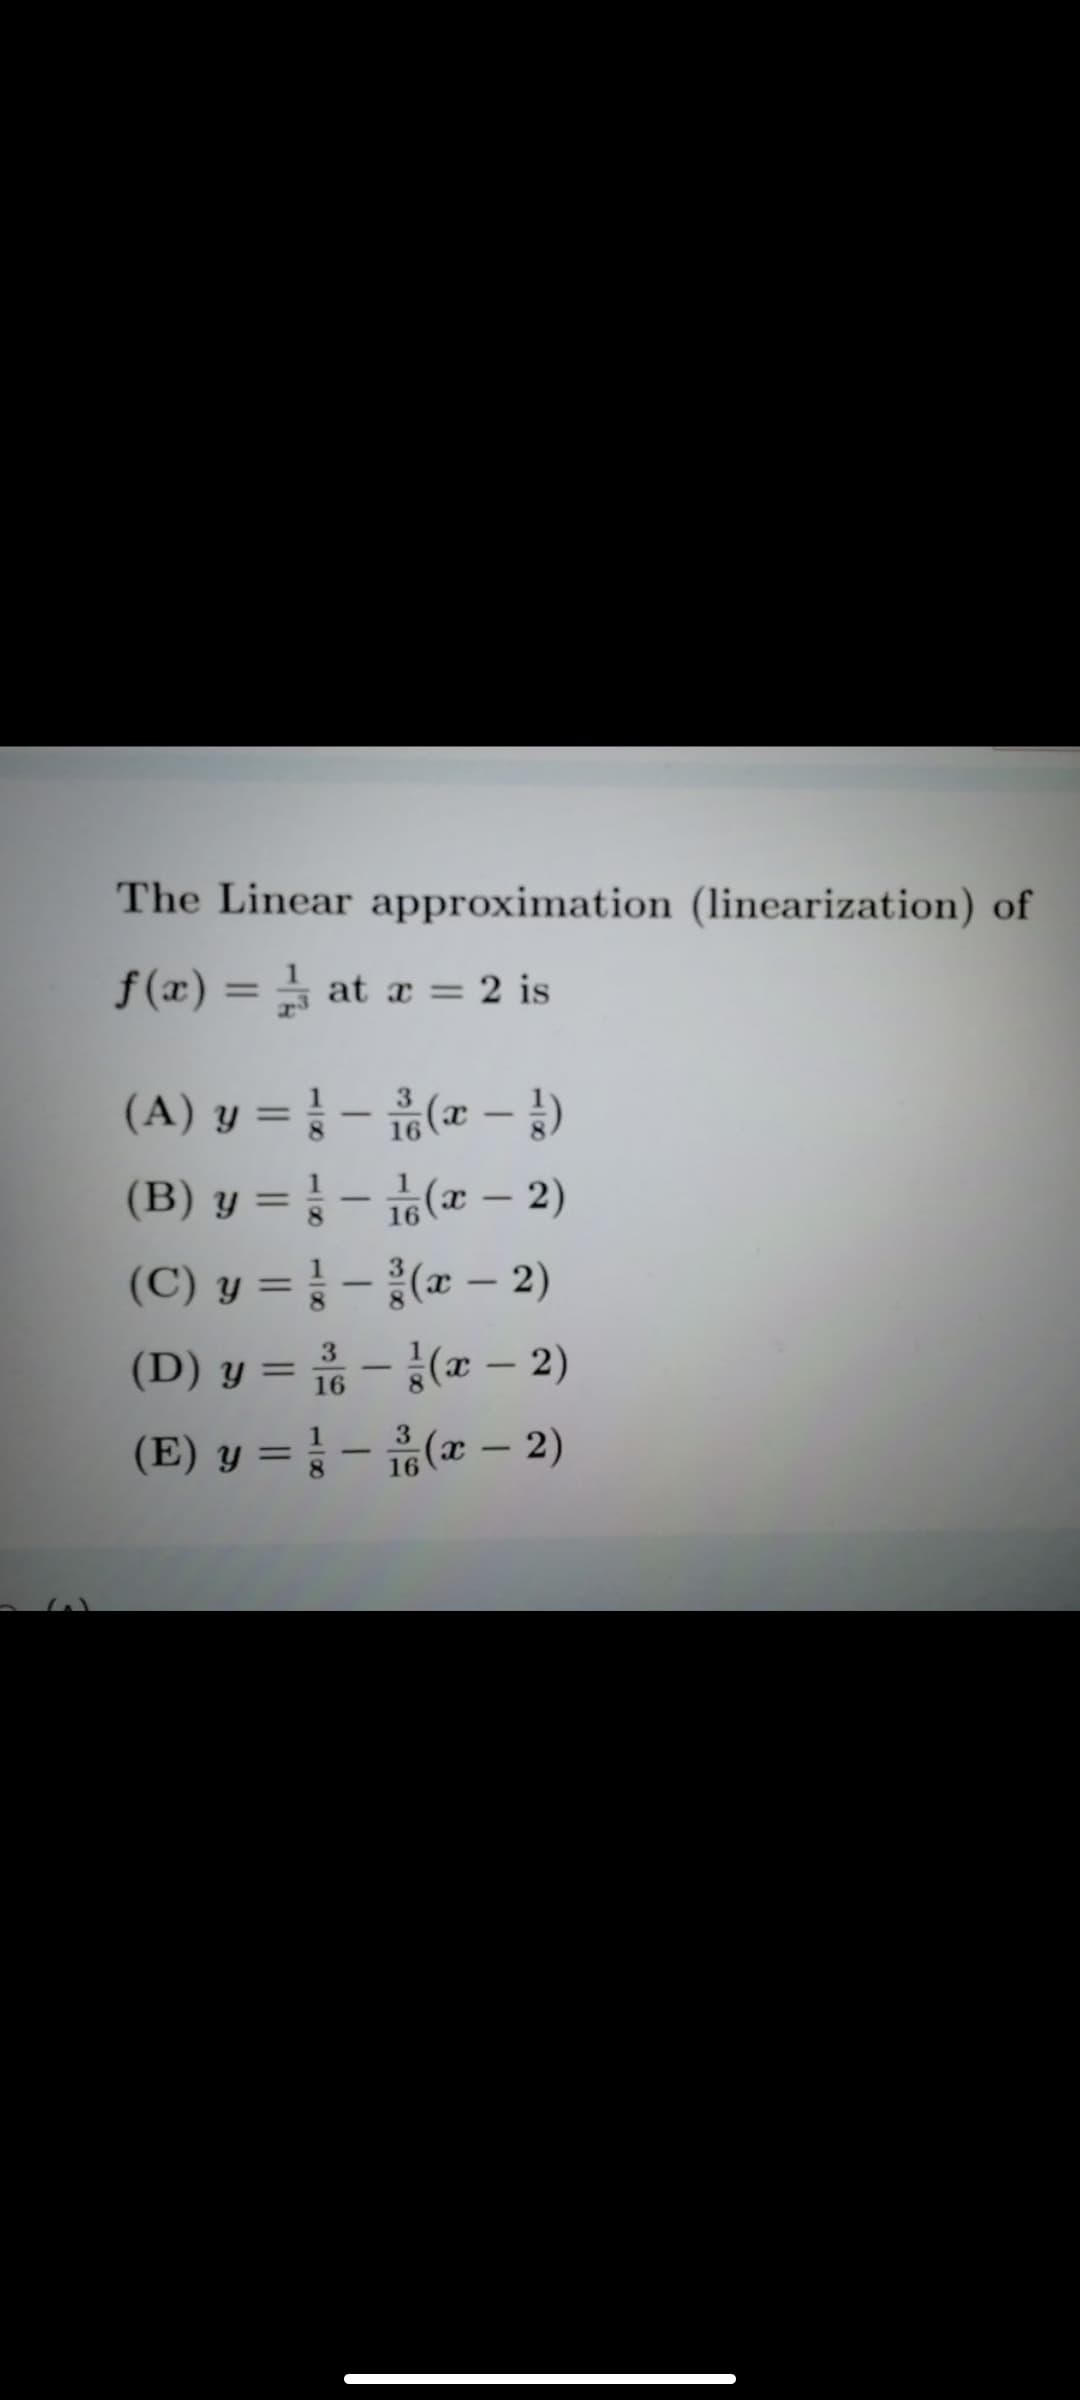 The Linear approximation (linearization) of
f (x) = at x = 2 is
%3D
%3D
(A) y = } - (* –)
%3D
(B) y = } - (x – 2)
(C) y = } - (x – 2)
(D) y = - (x – 2)
(E) y %3D 3-유(z- 2)
%3D
3.
%3D
16
Y =
8.
